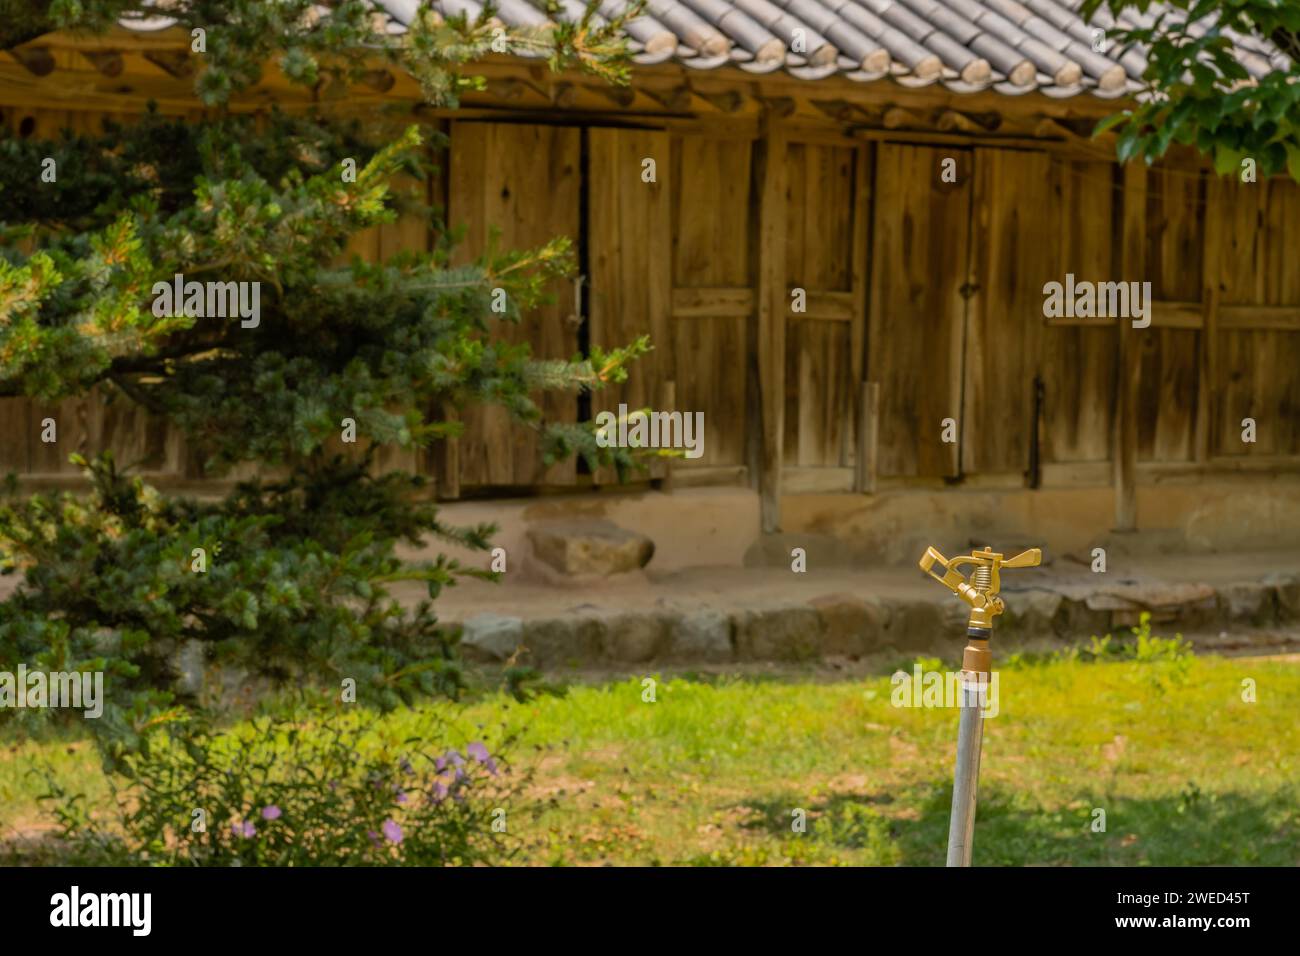 Copper water sprinkler in grassy lawn in front of wooden building located in public park displaying traditional Korean architecture Stock Photo